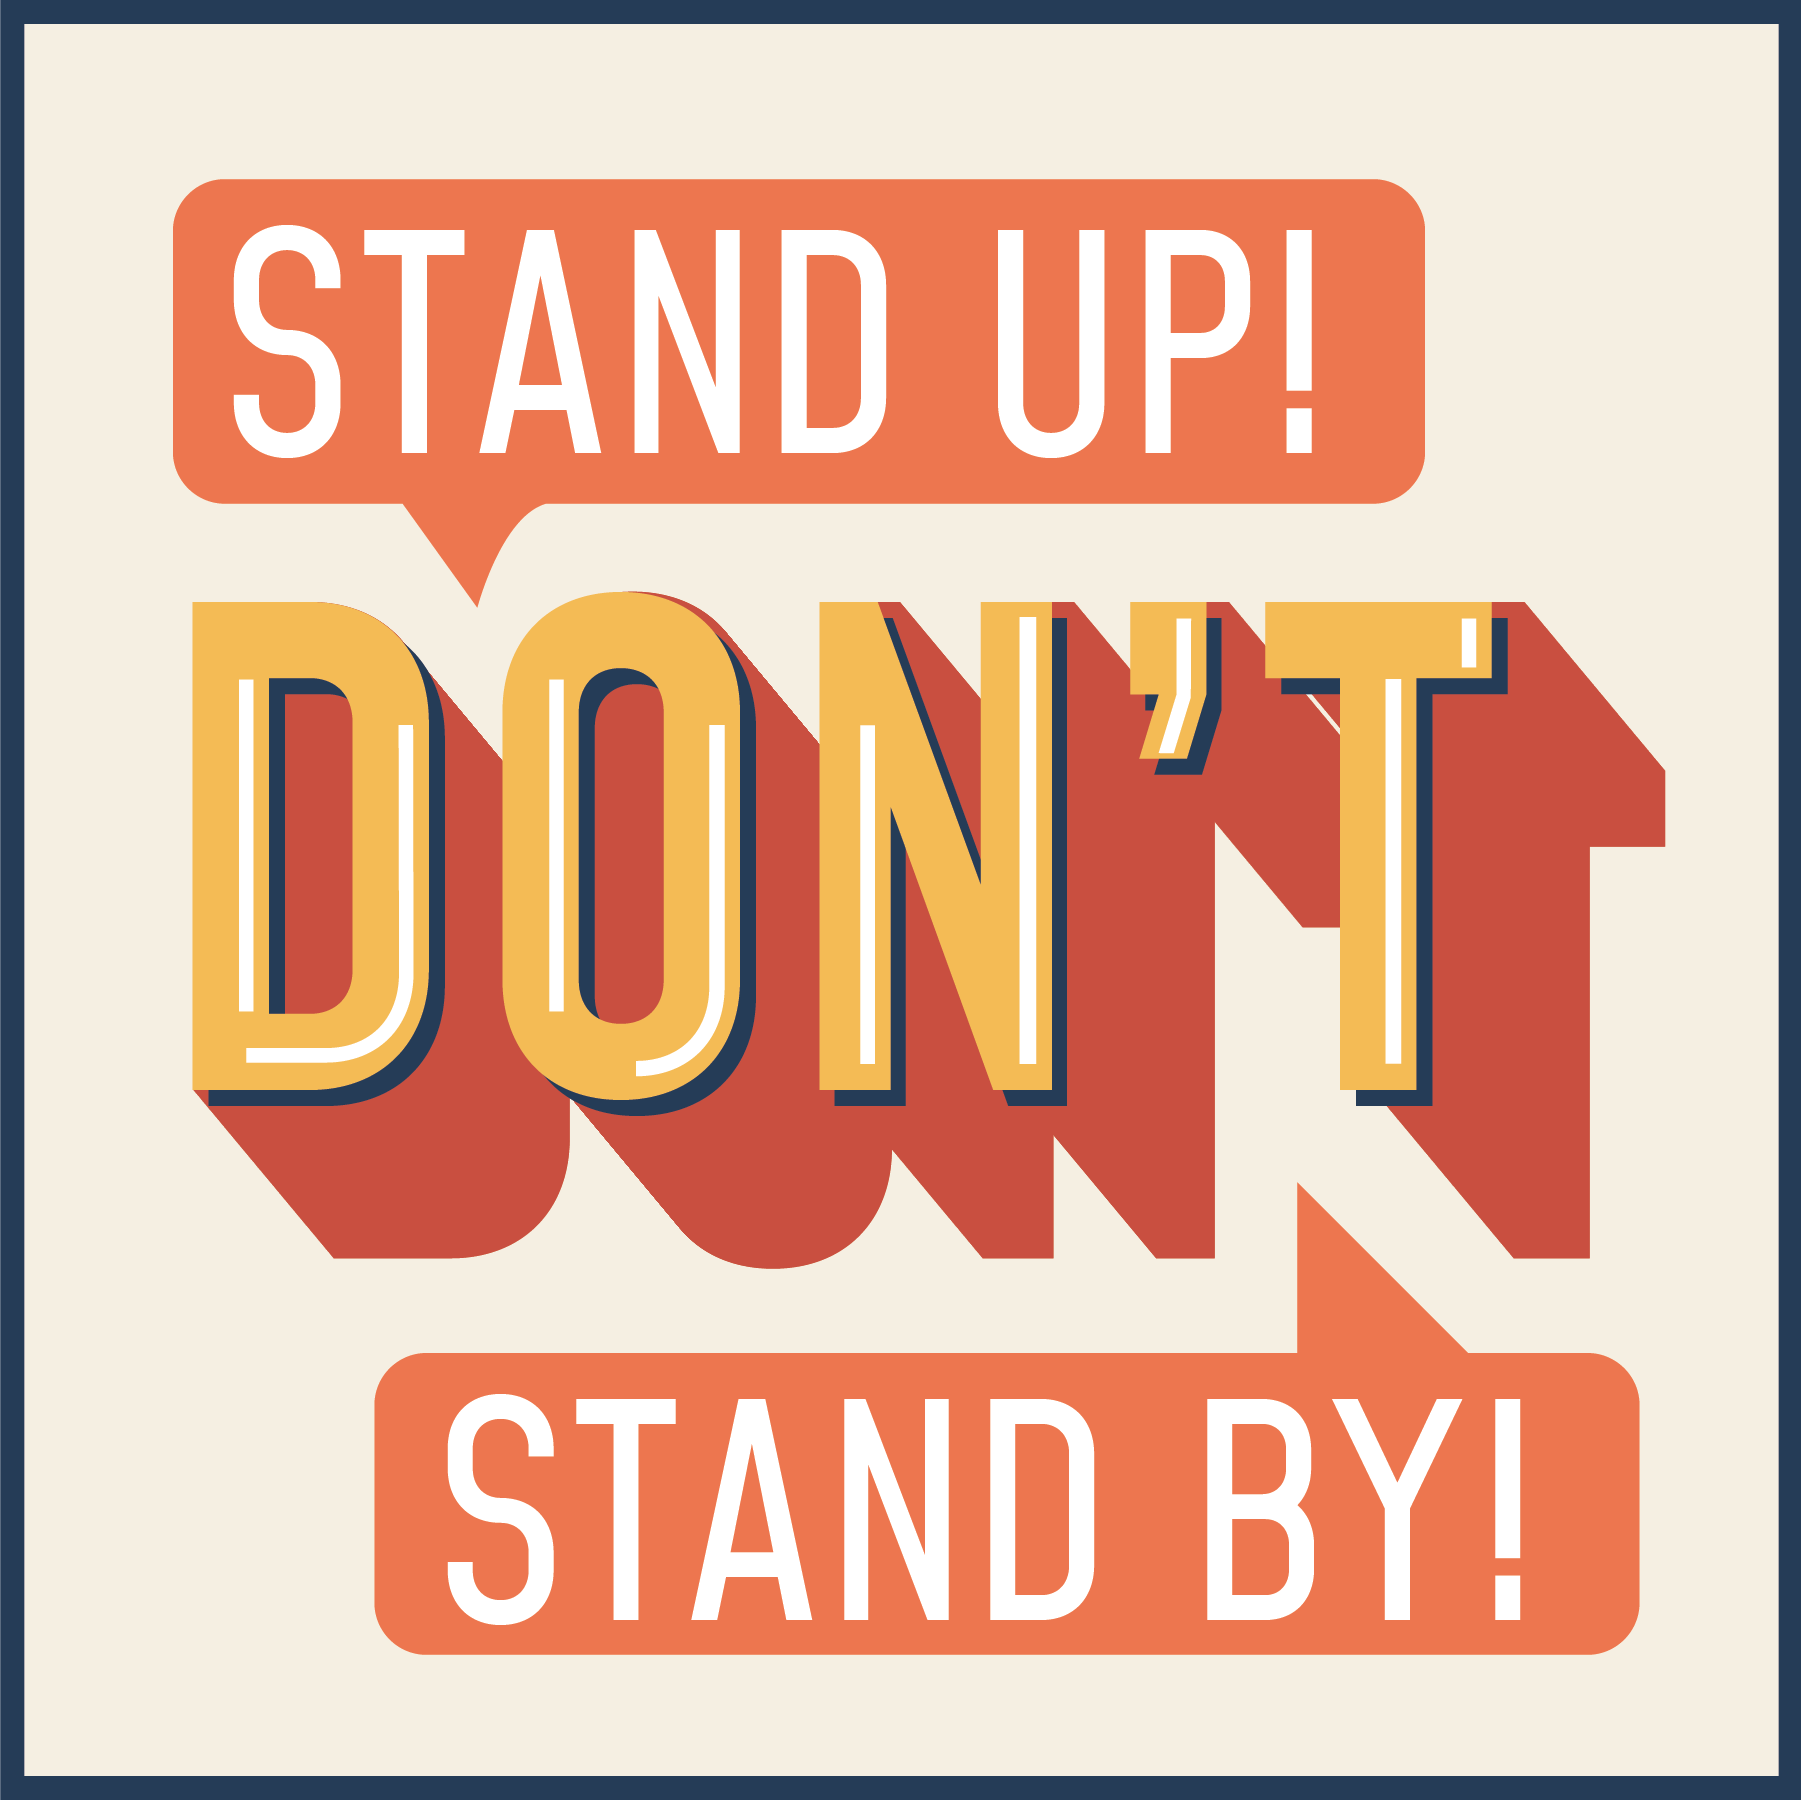 Stand Up! Don't Stand By!